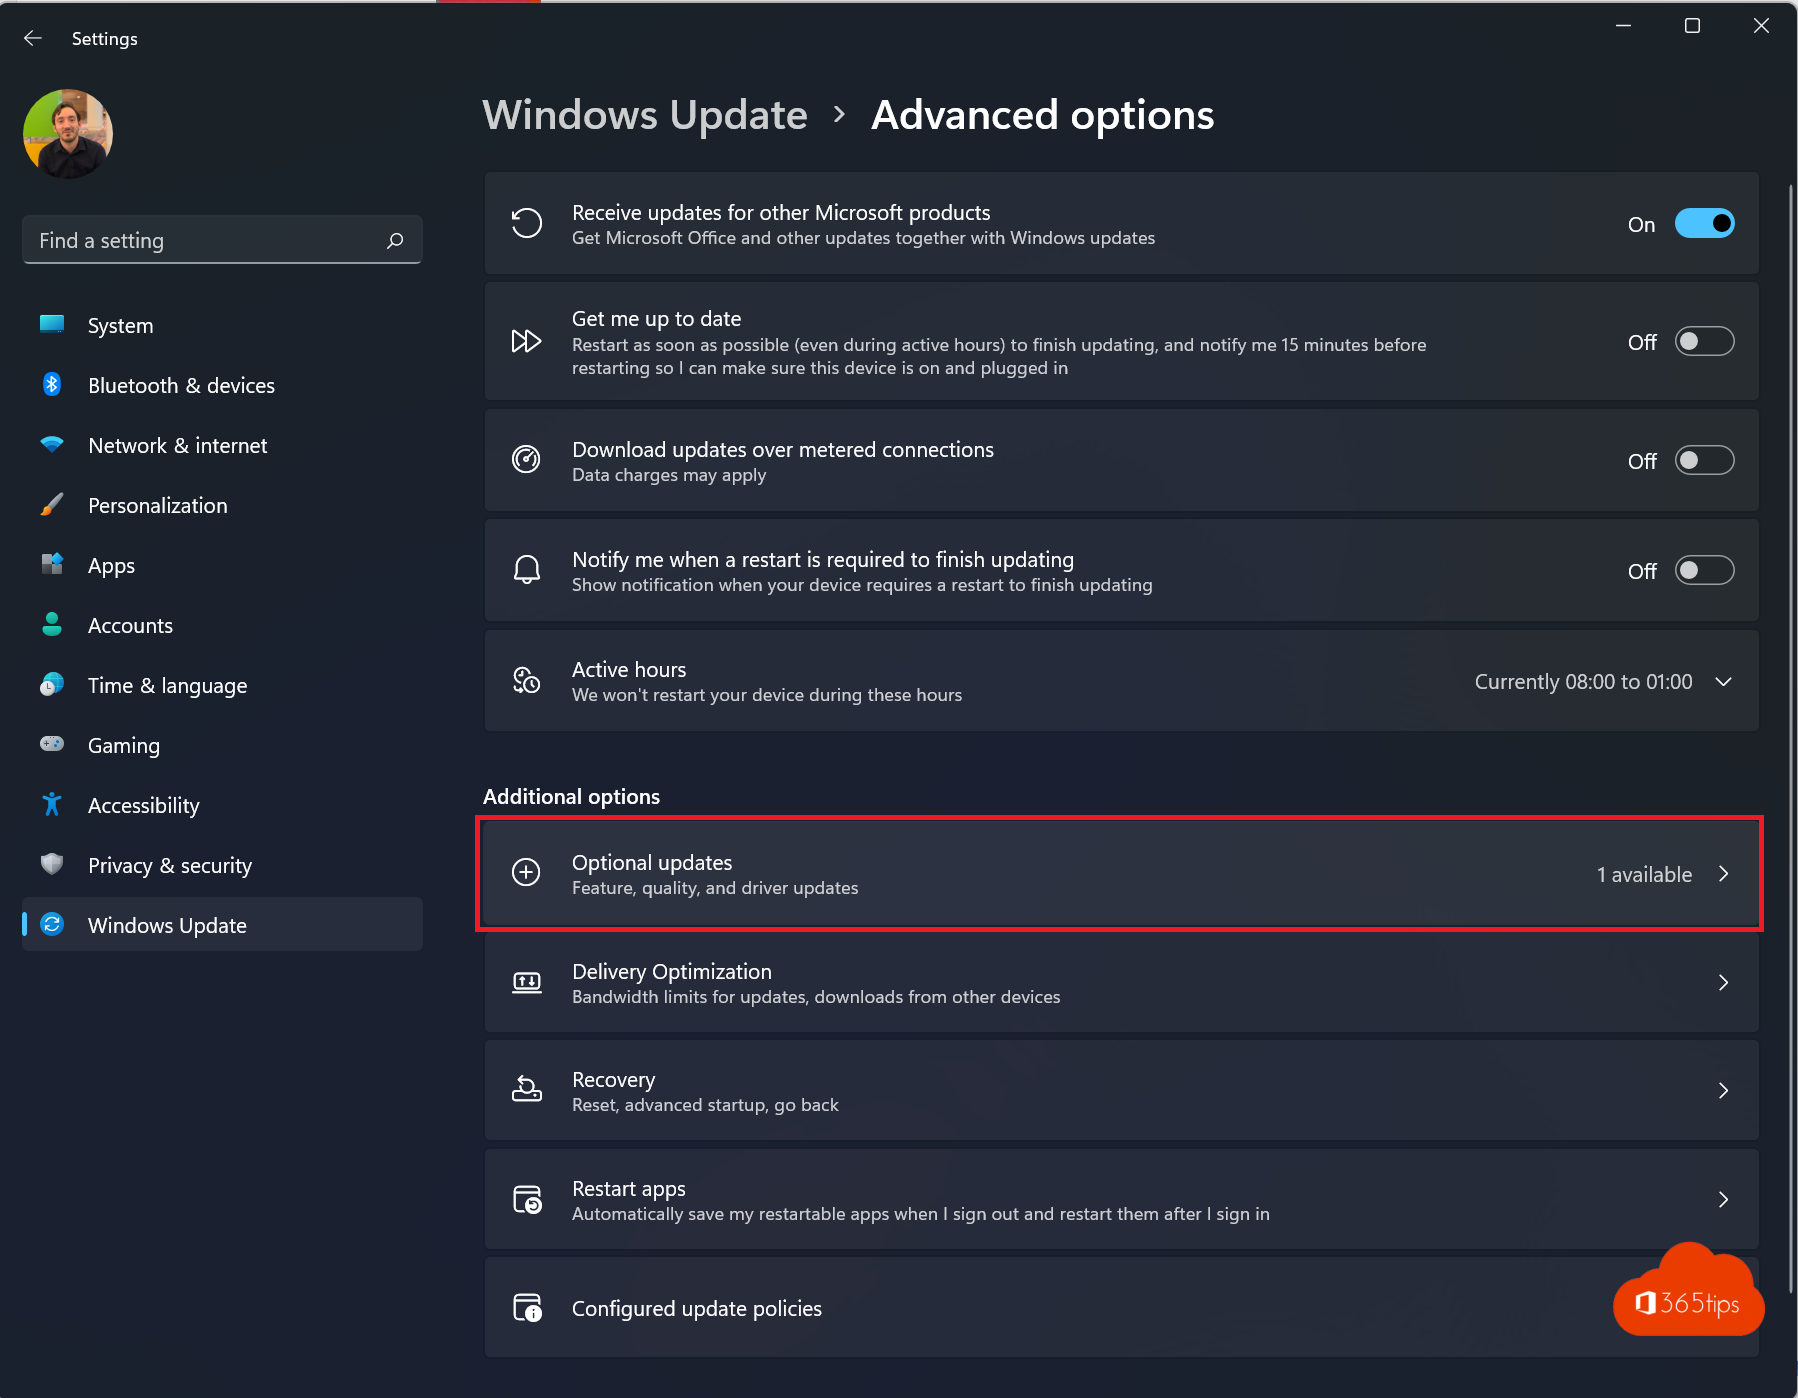 How to receive updates for other Microsoft products in Windows 11